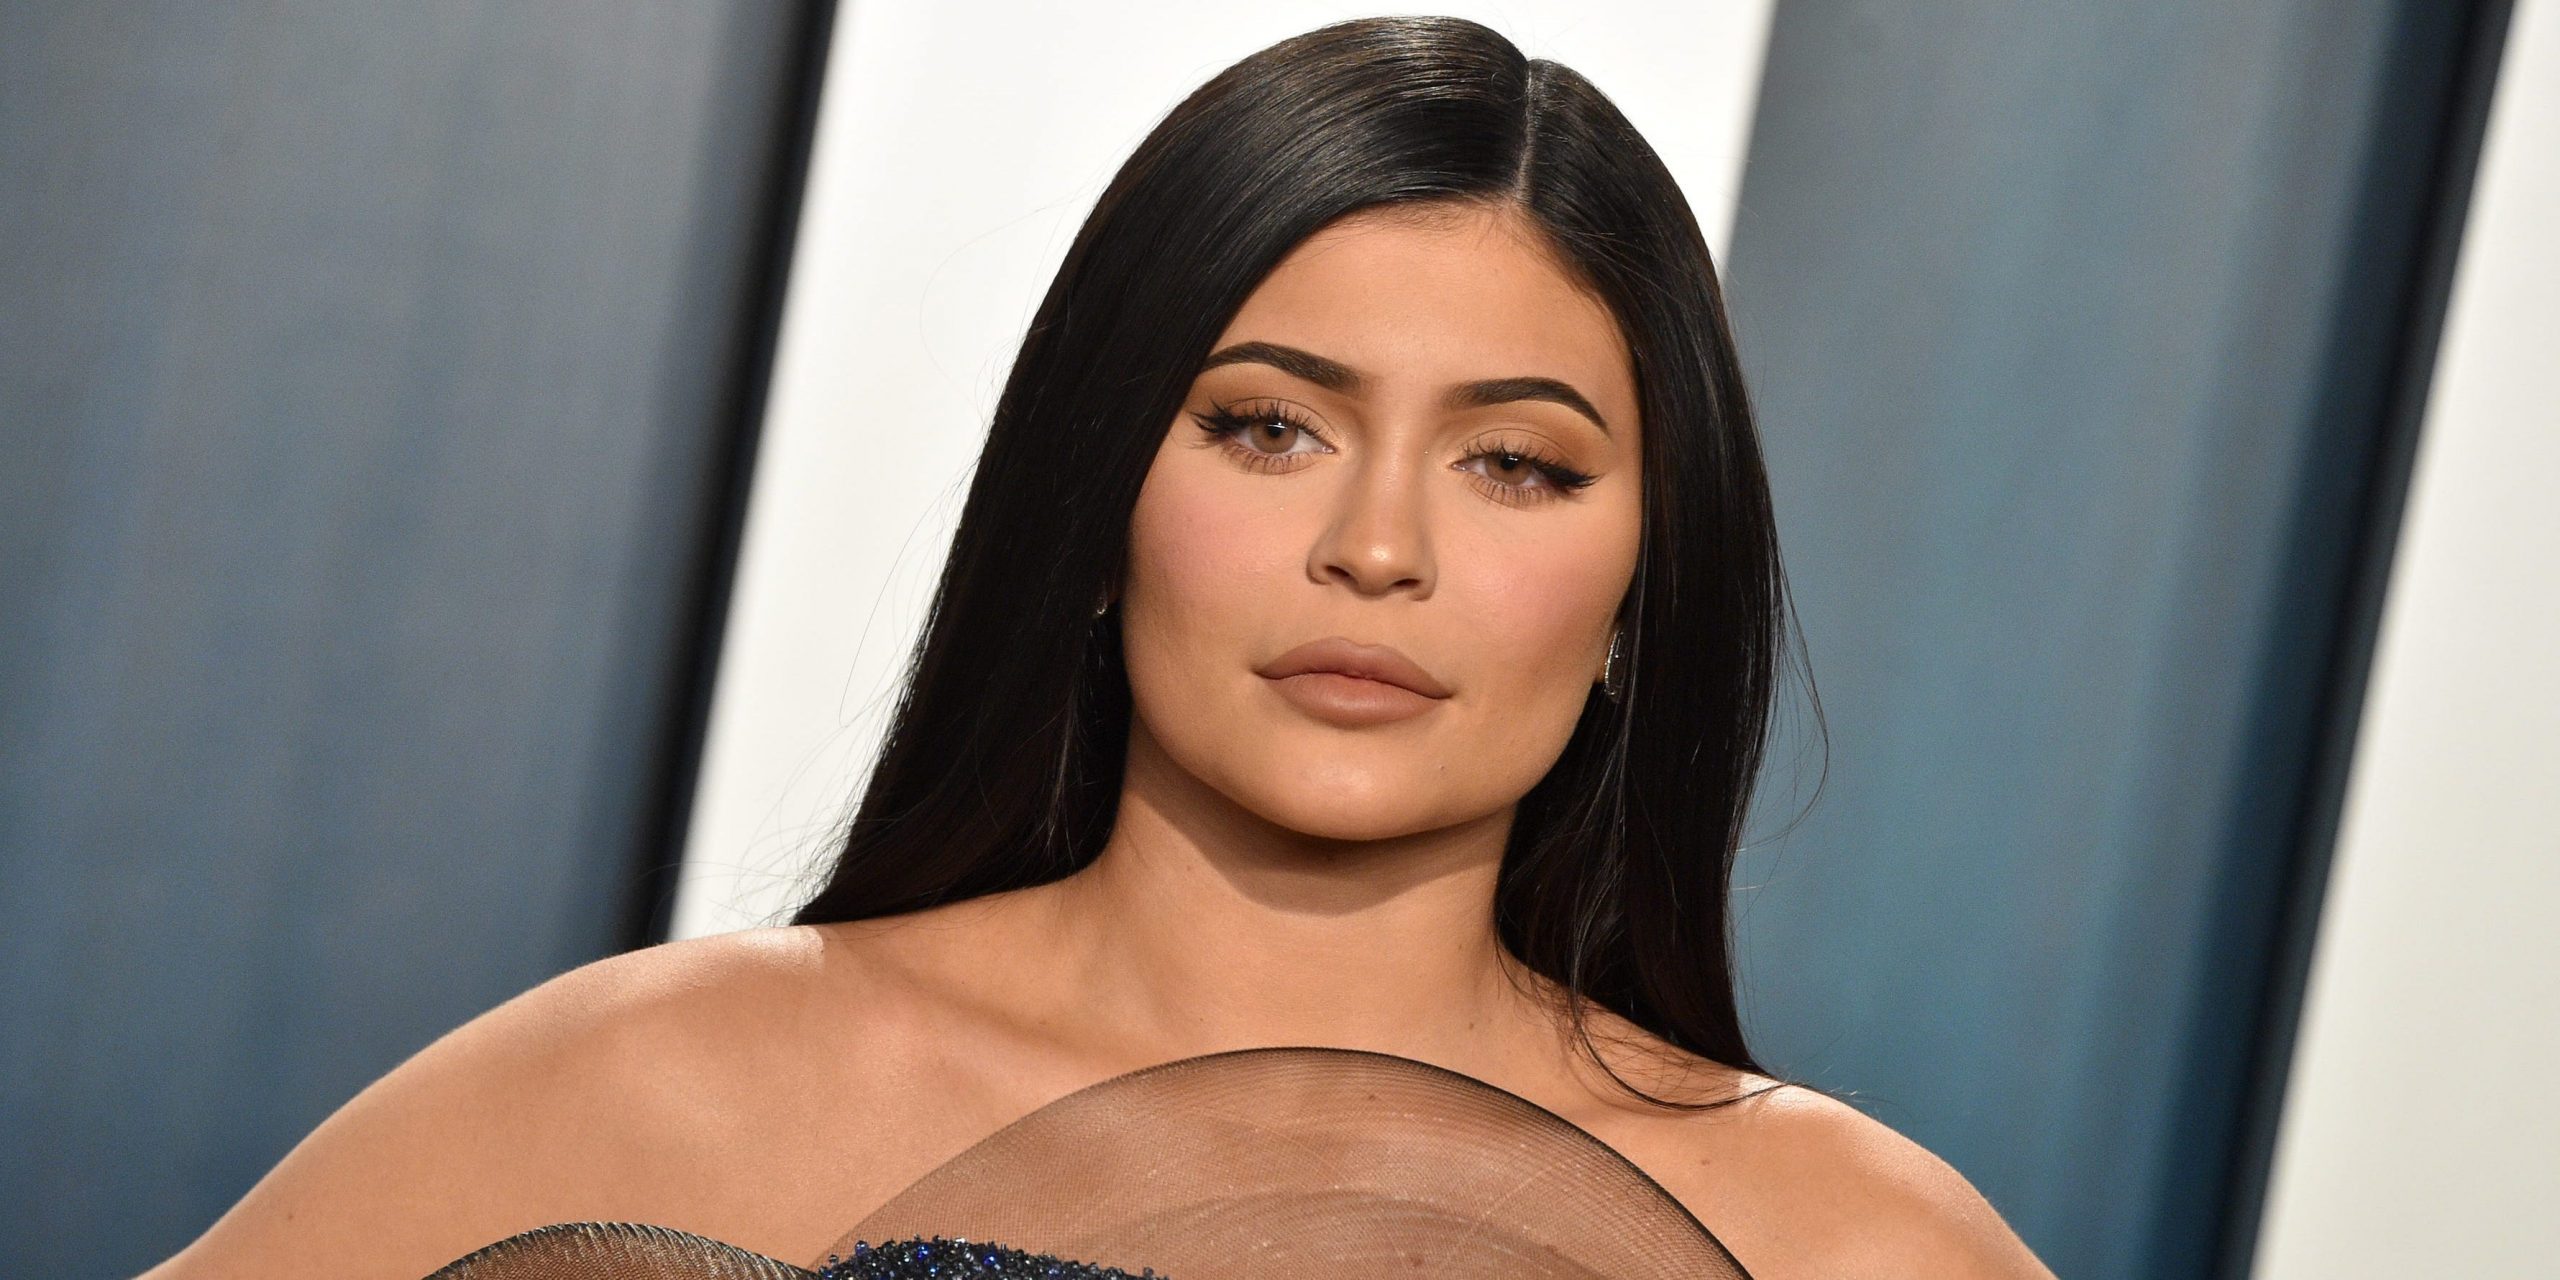 Kylie Jenner's fans trolled her for using the wrong flag emoji in a tweet about Kylie Skin.